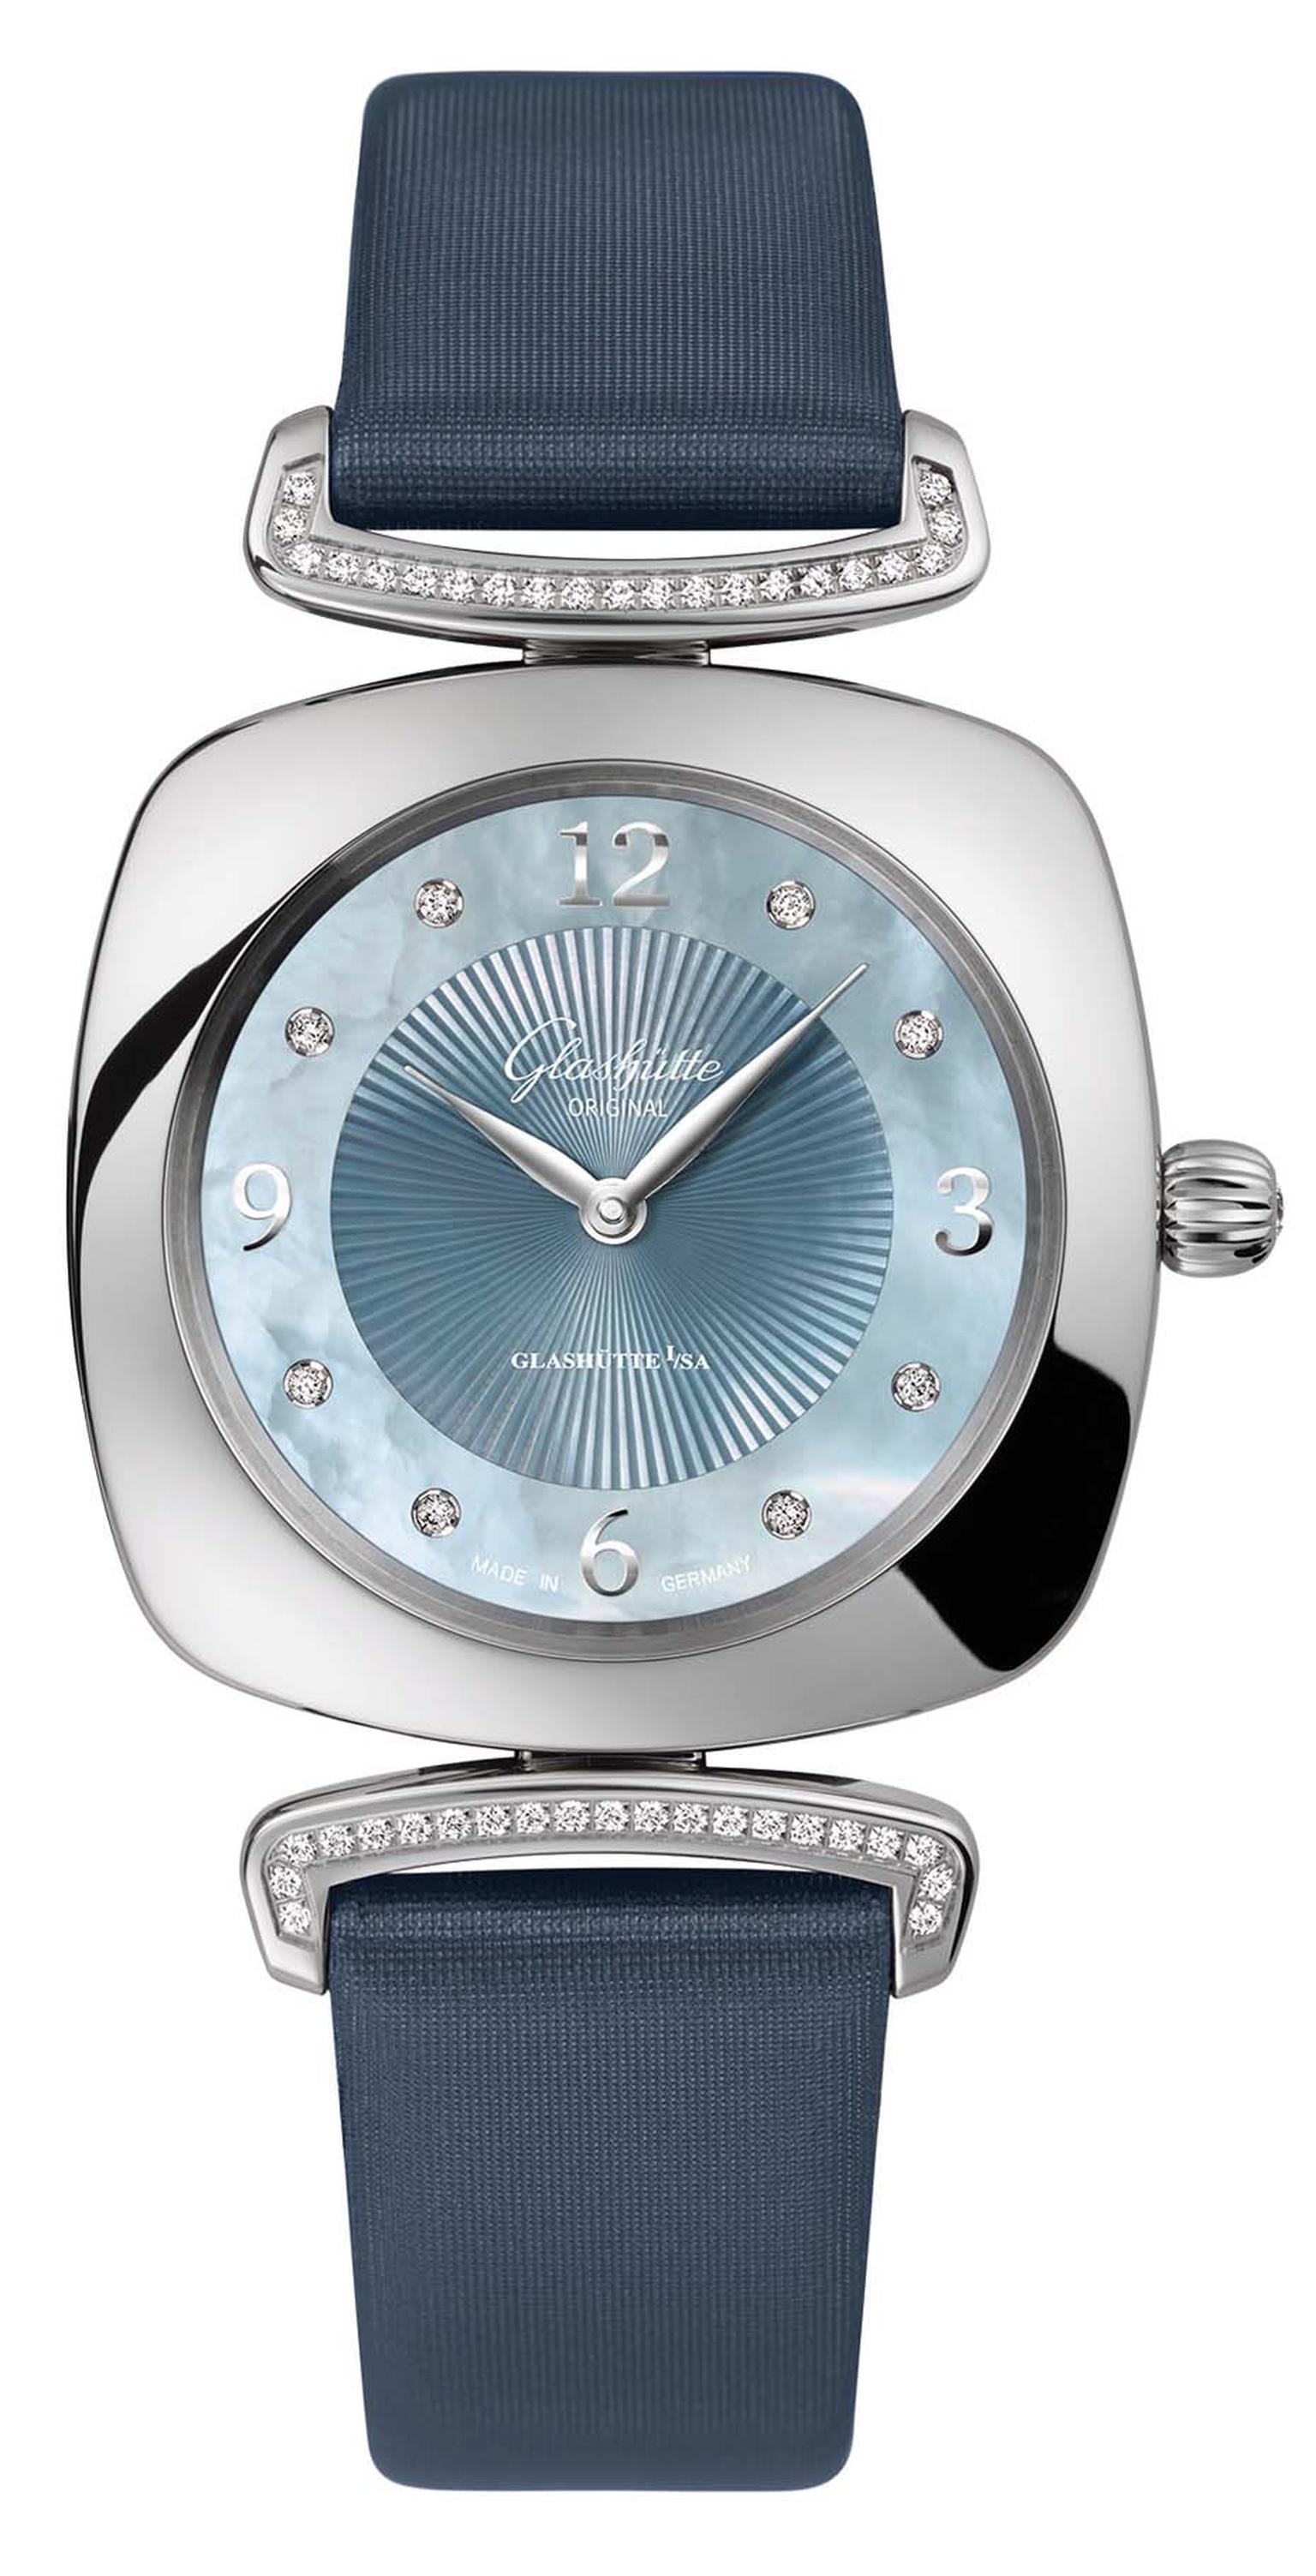 Glashütte Pavonina ladies' watch with a cushion-shaped 31 x 31mm stainless steel case is adorned with a lovely blue mother-of-pearl dial, diamond indices and diamond-set lugs.